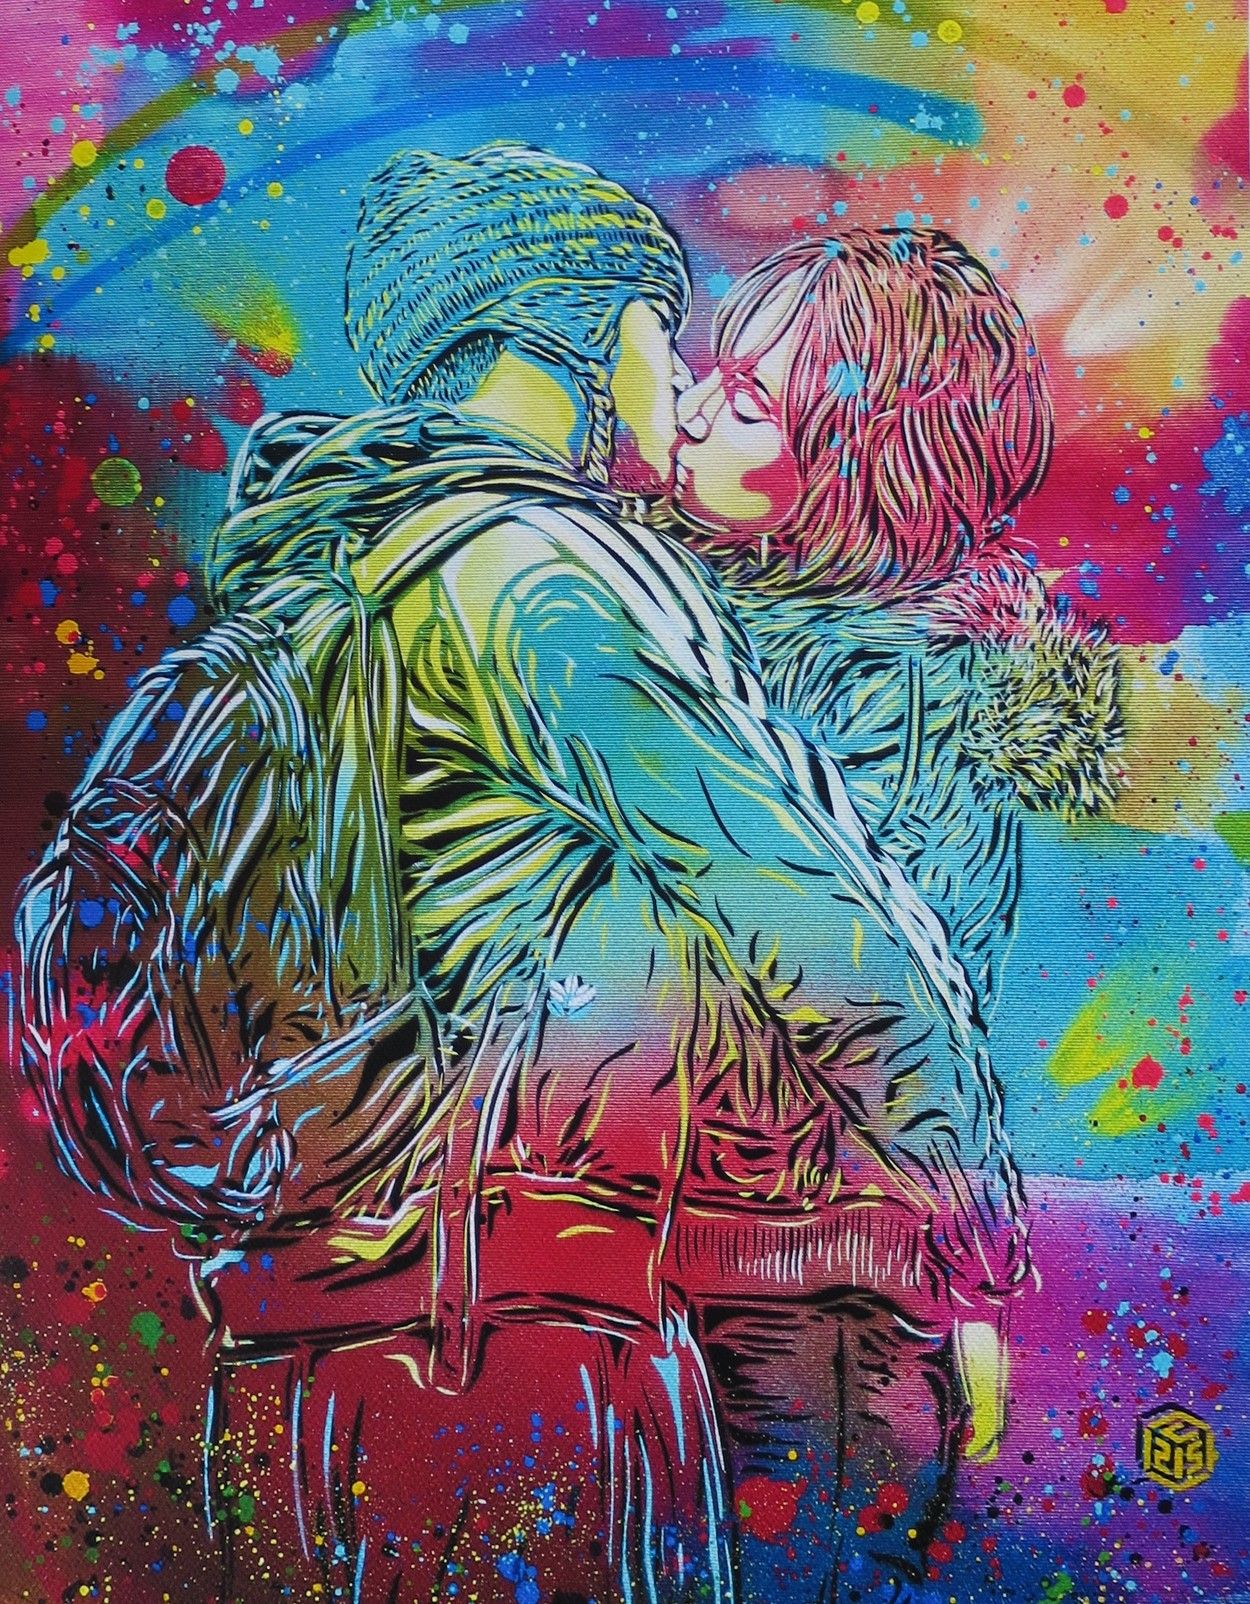 C215 C215

Love is All, 2021

Digital printing on paper.

Signed and numbered ou&hellip;